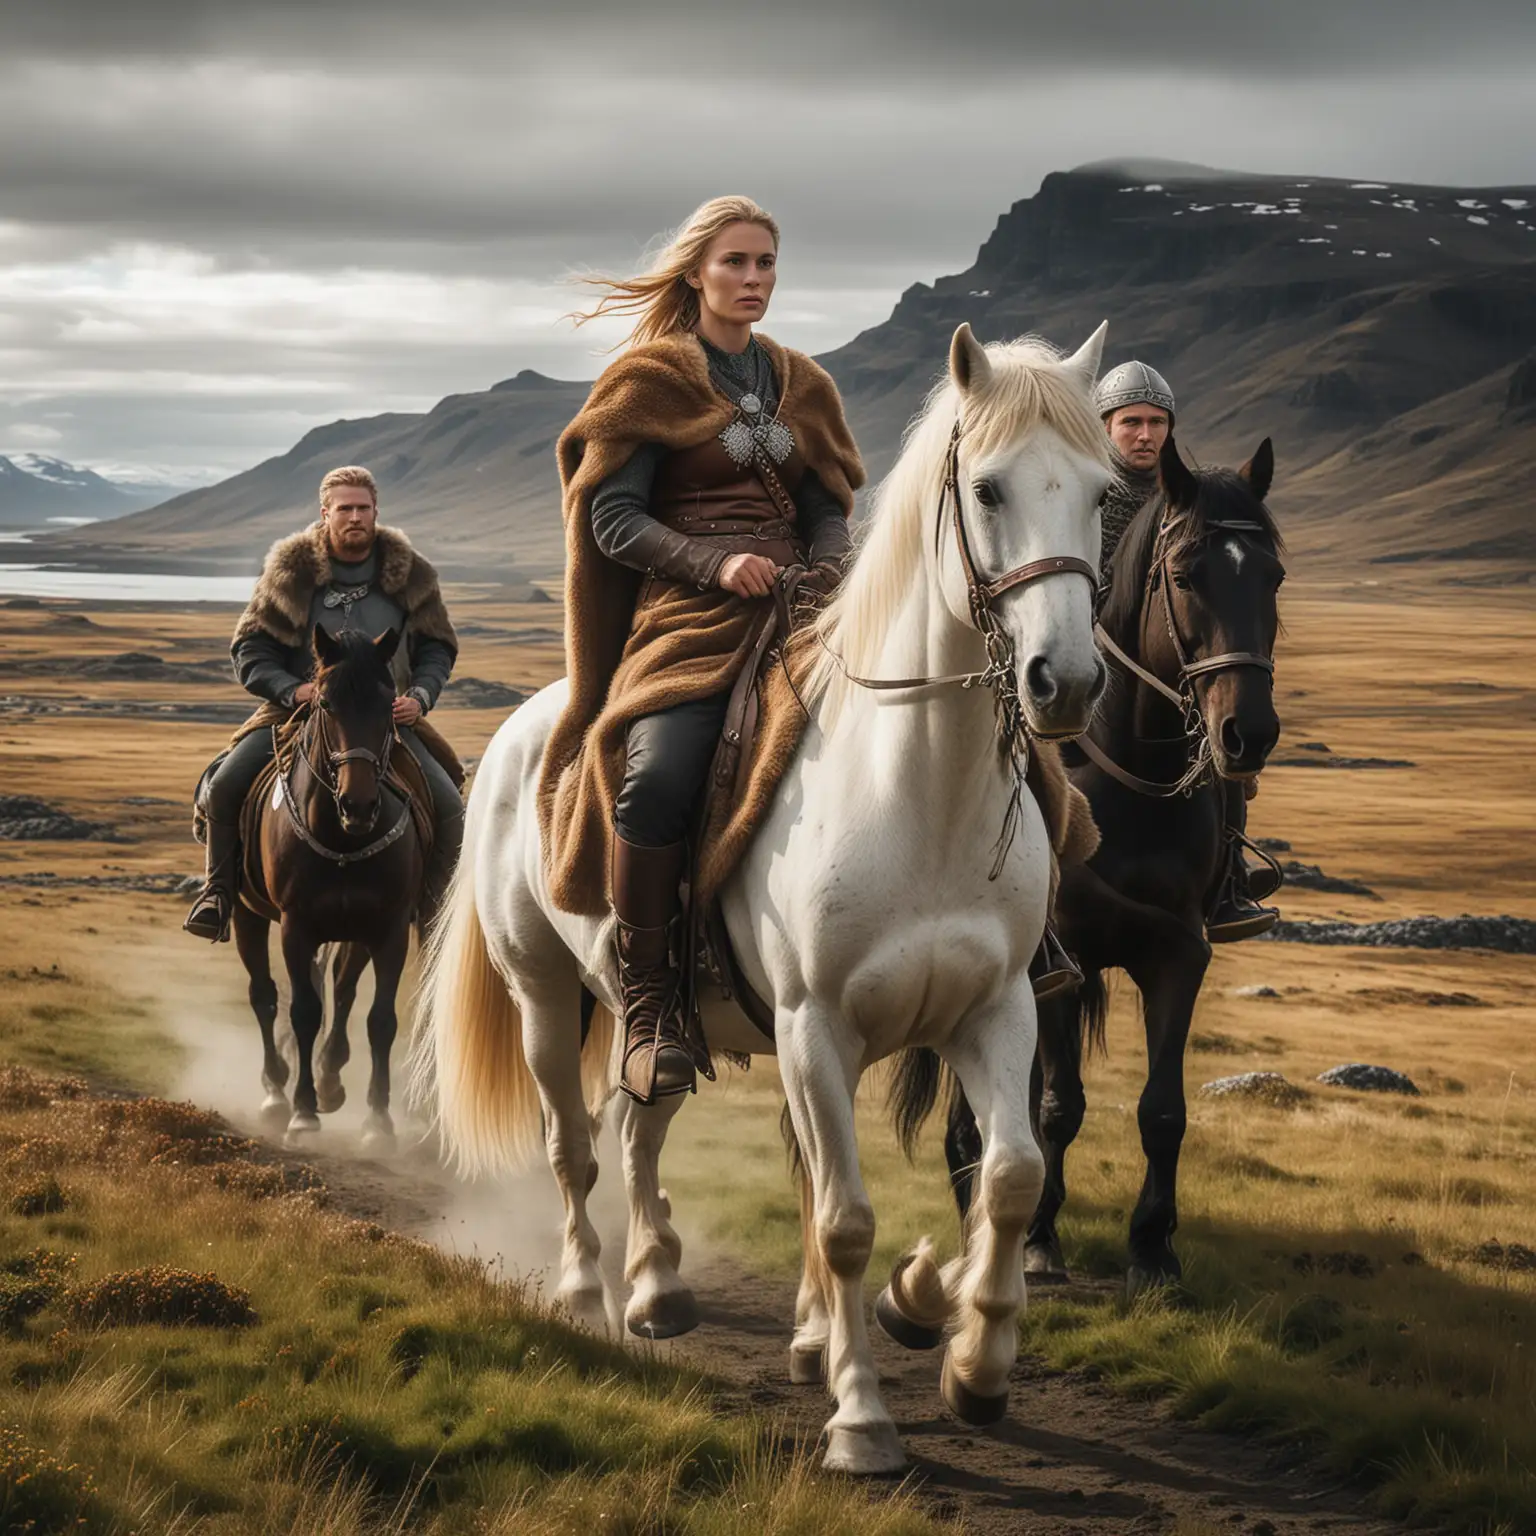 One viking woman rides on a horse through an icelandic landscape. She is escorted by two male warriors on horseback. The woman is the leader. She is proud and wealthy